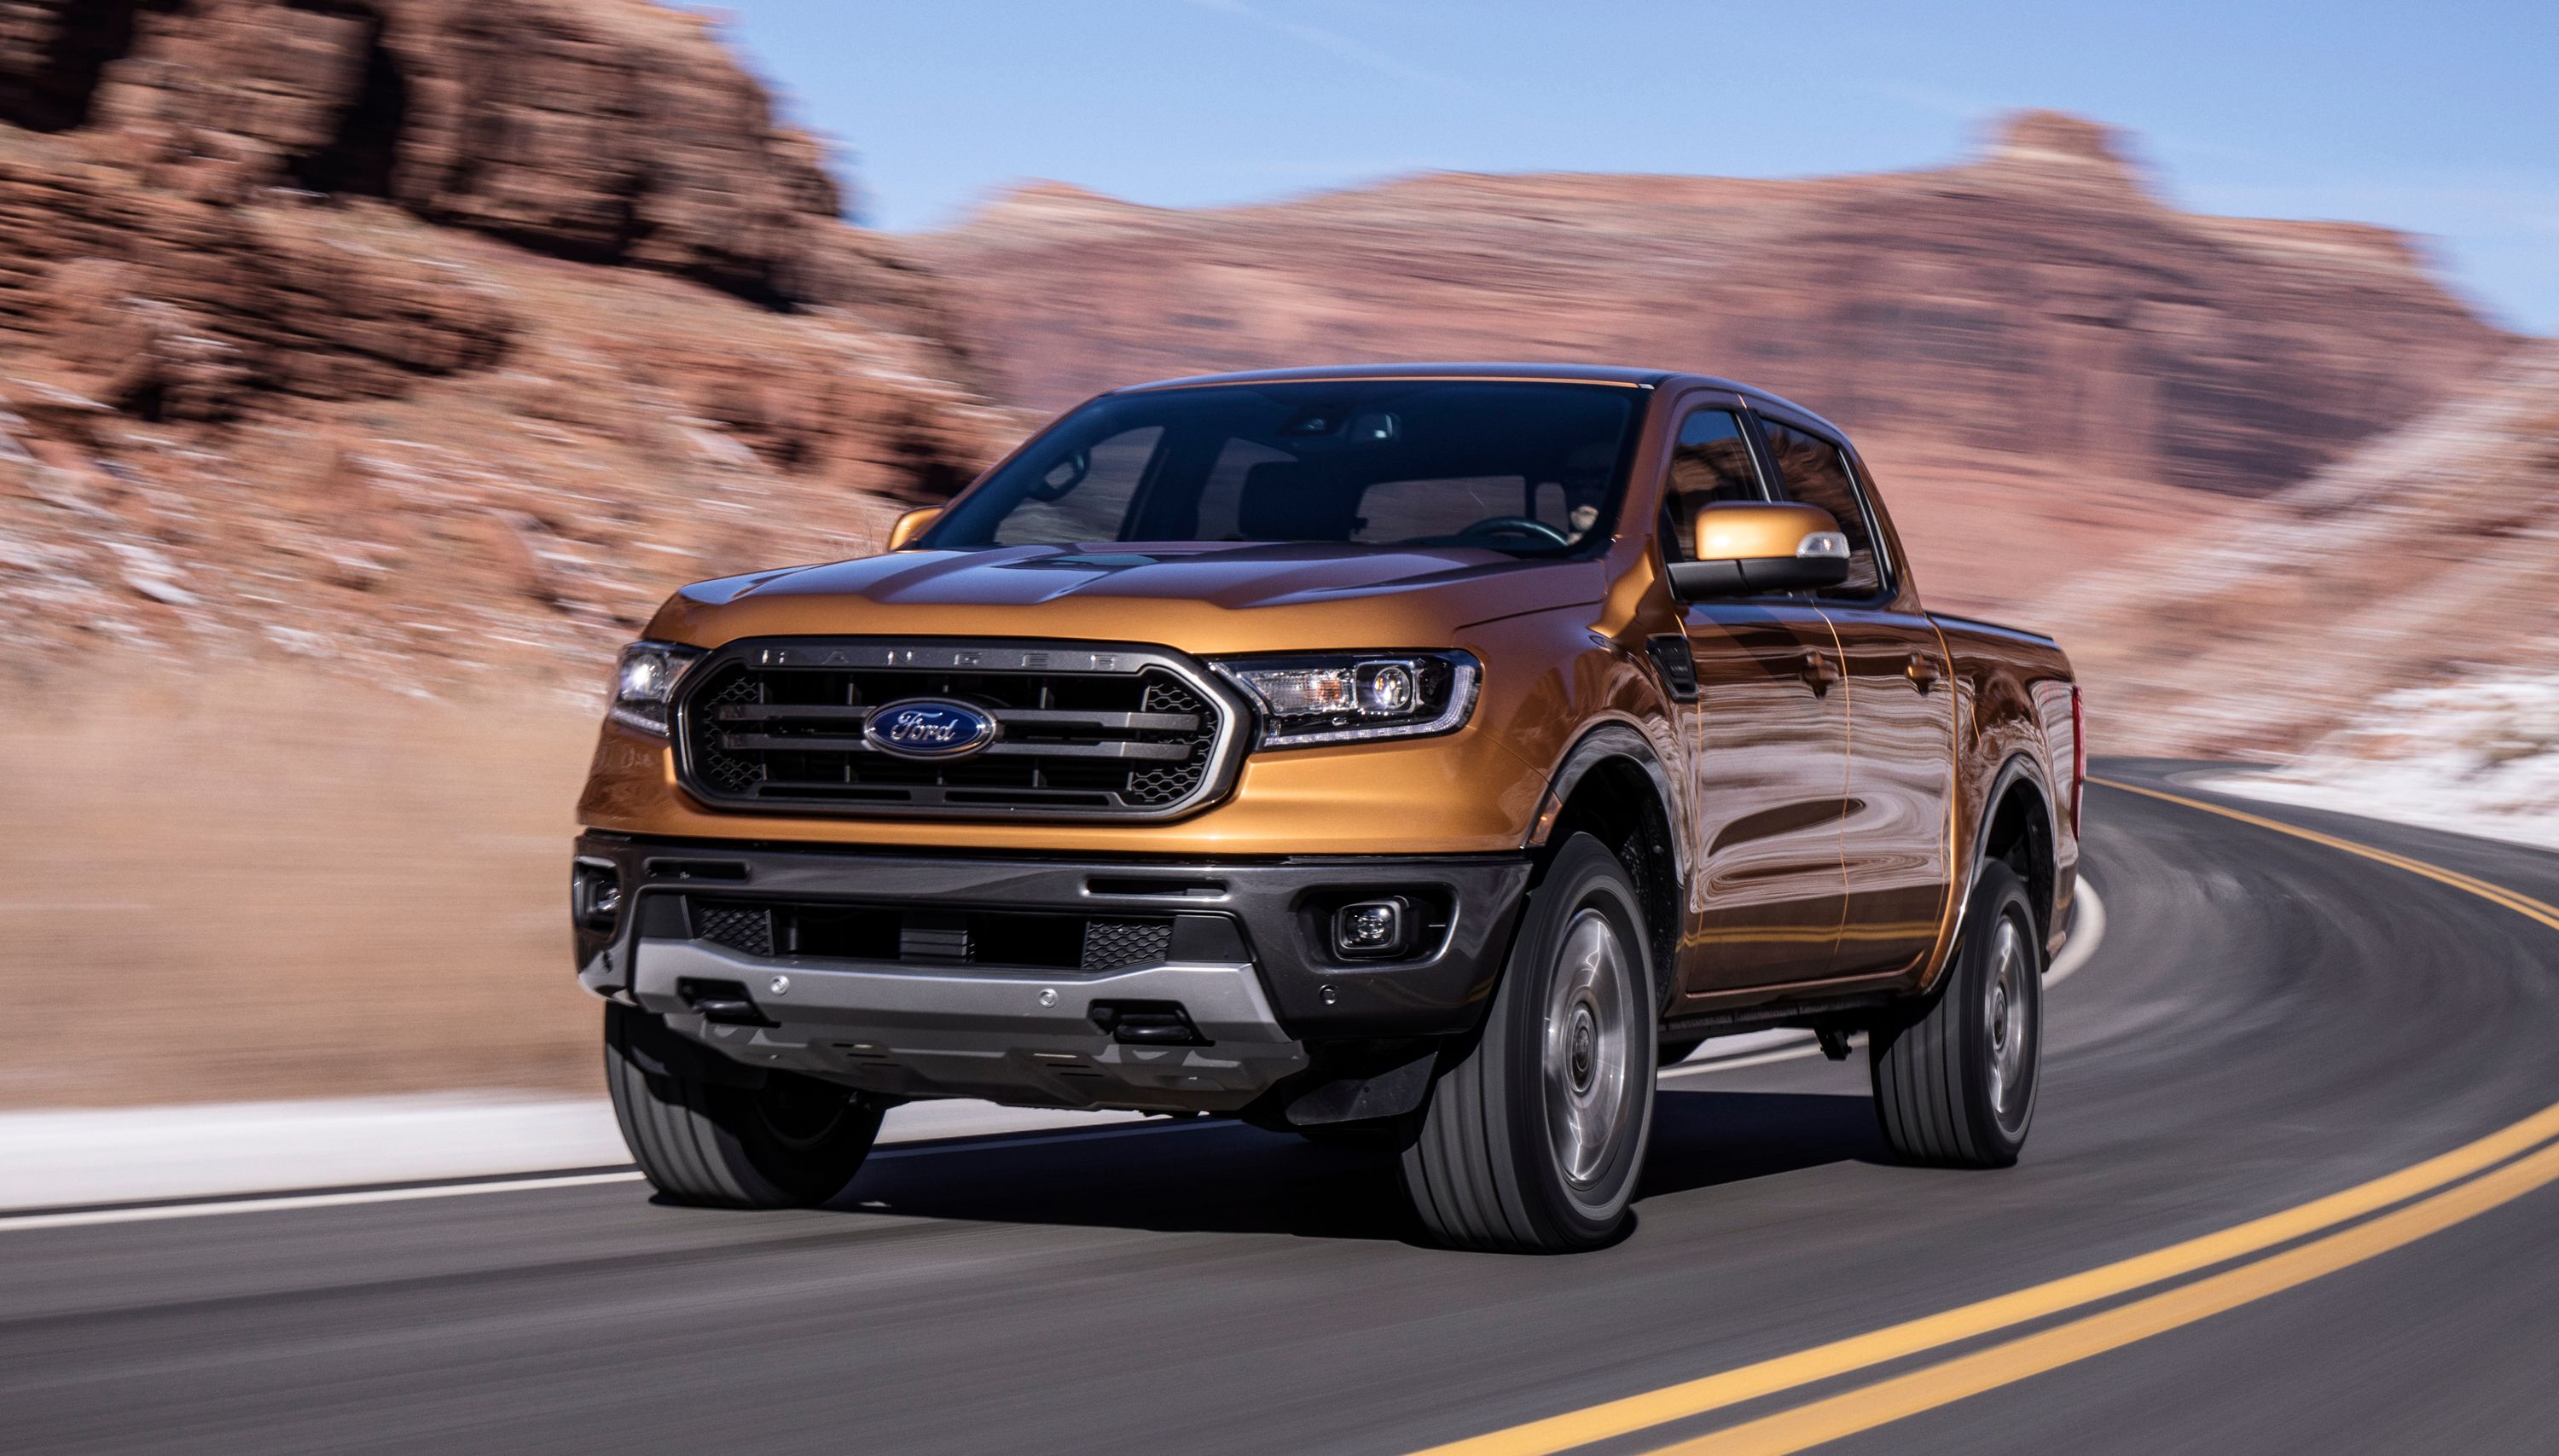 2019 Leaked Accessory List for the 2019 Ford Ranger Proves Ford isn't Playing Around